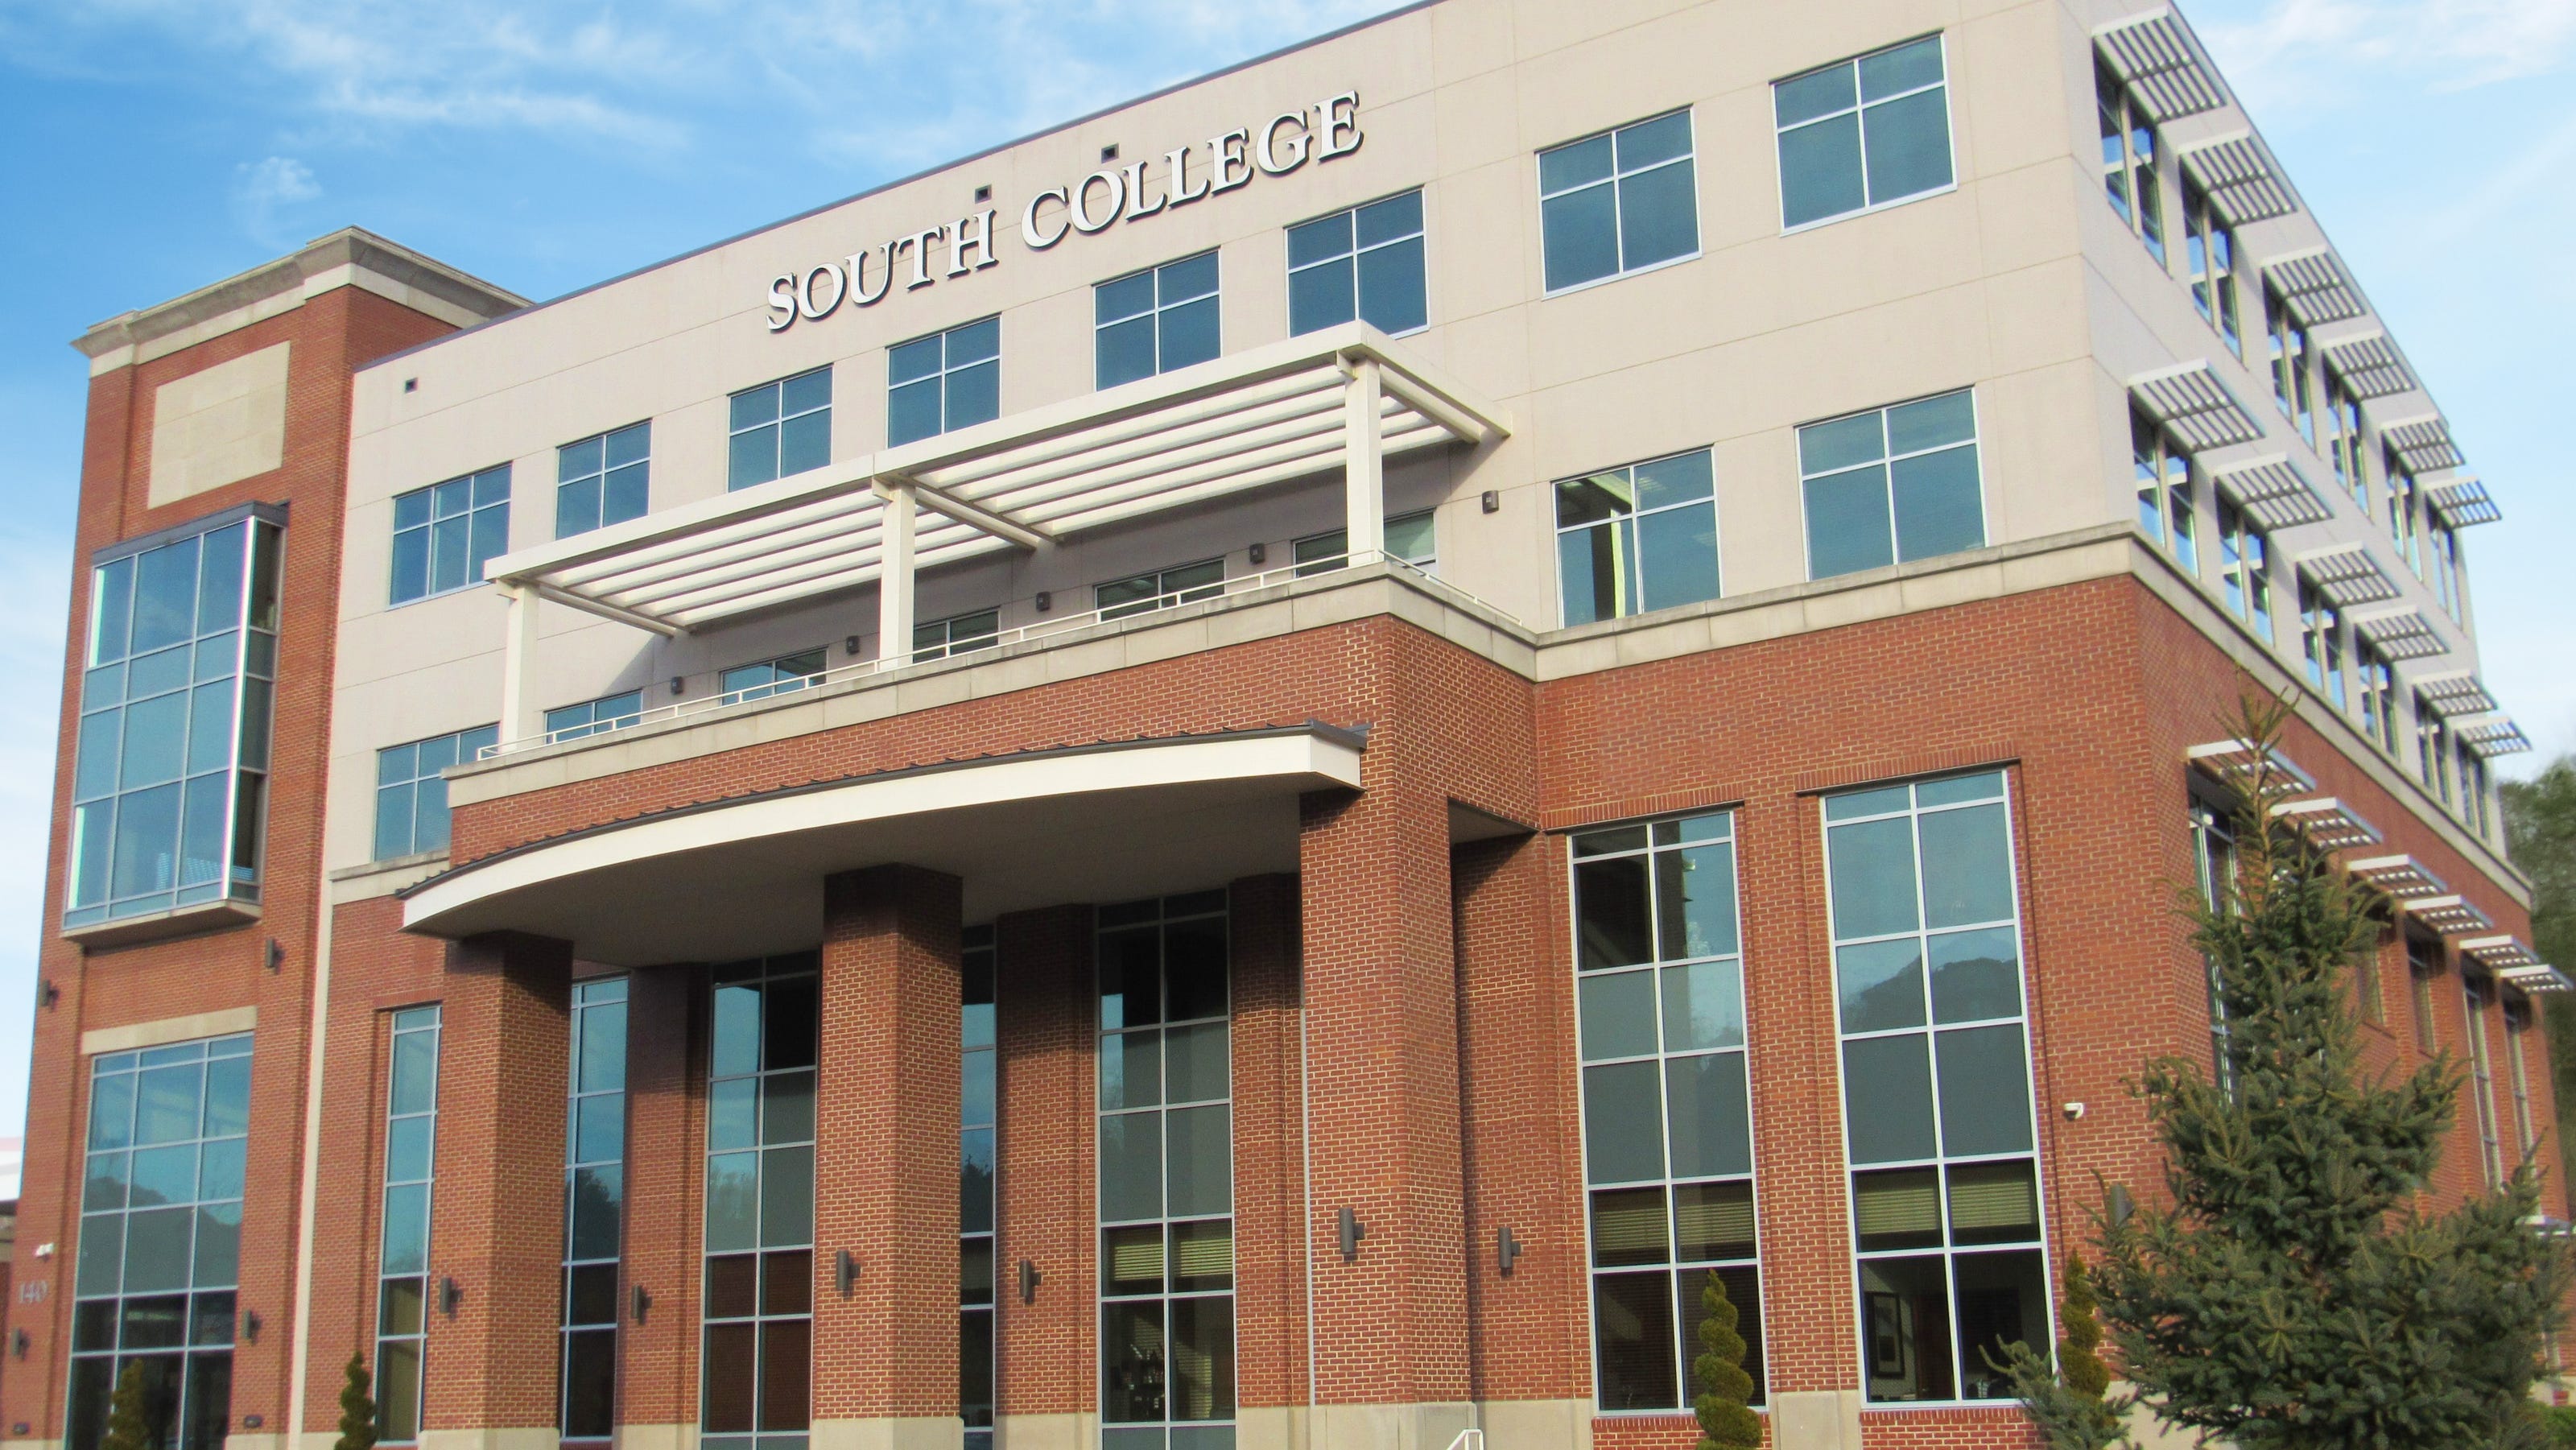 South College offers free classes in response to COVID pandemic